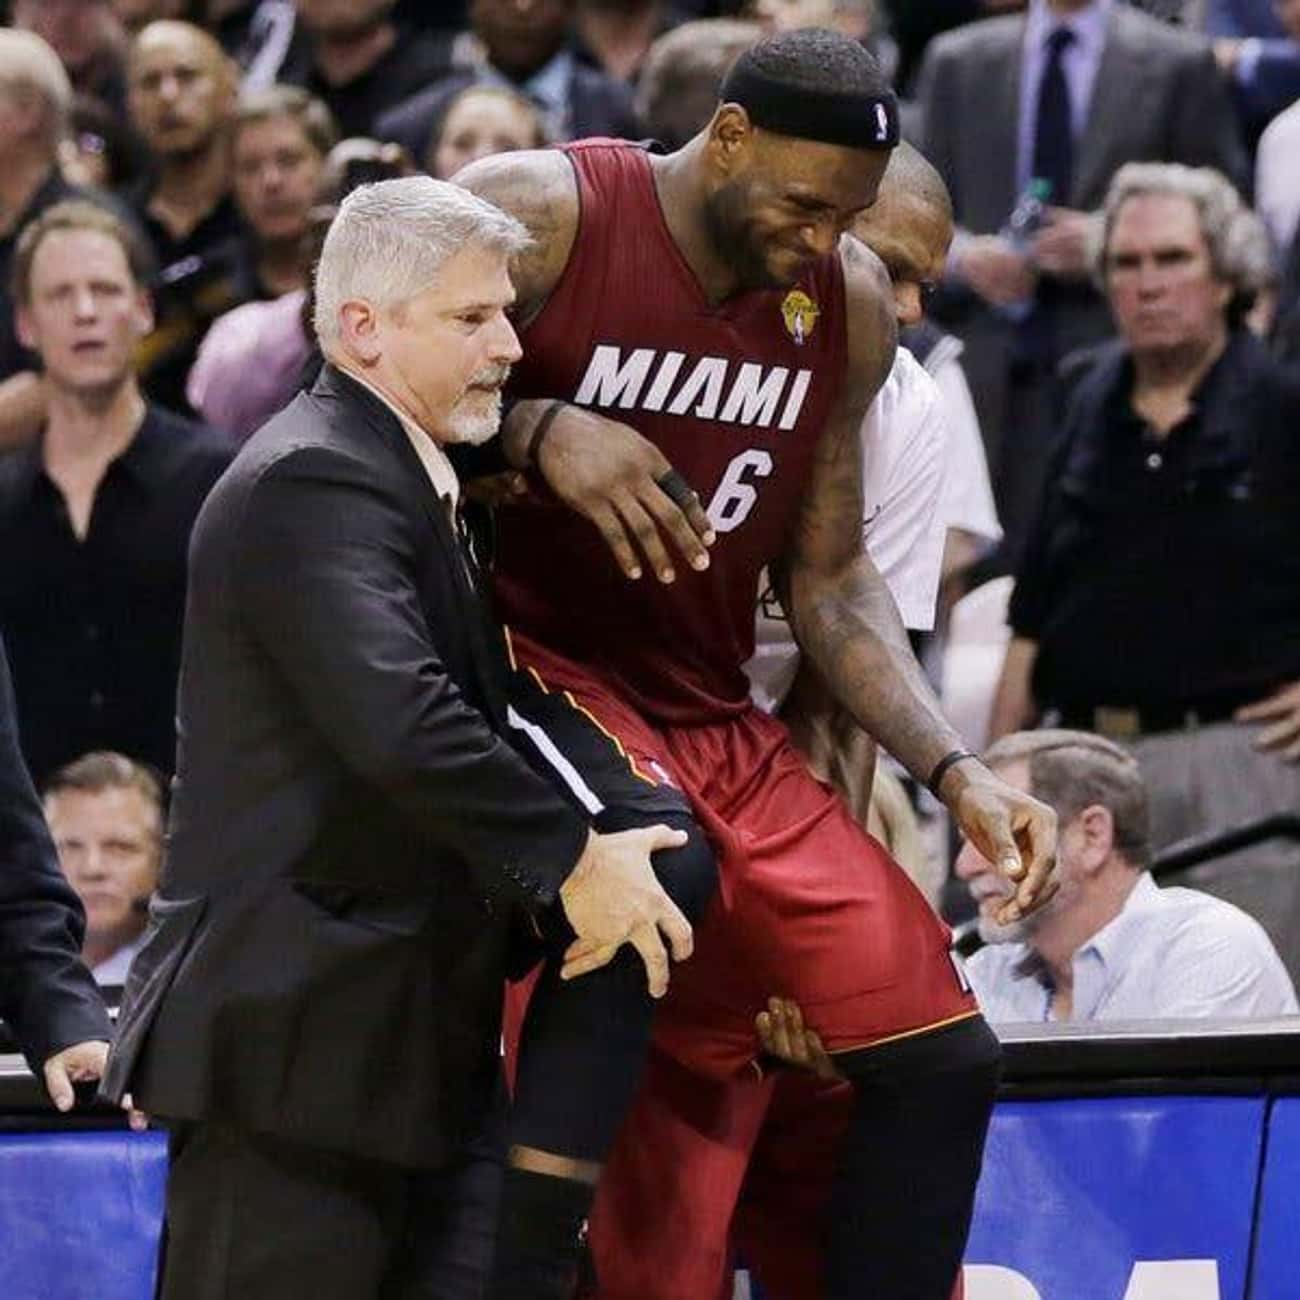 The San Antonio Spurs Purposefully Broke Their A/C During The 2014 Finals To Accelerate LeBron James' Cramping